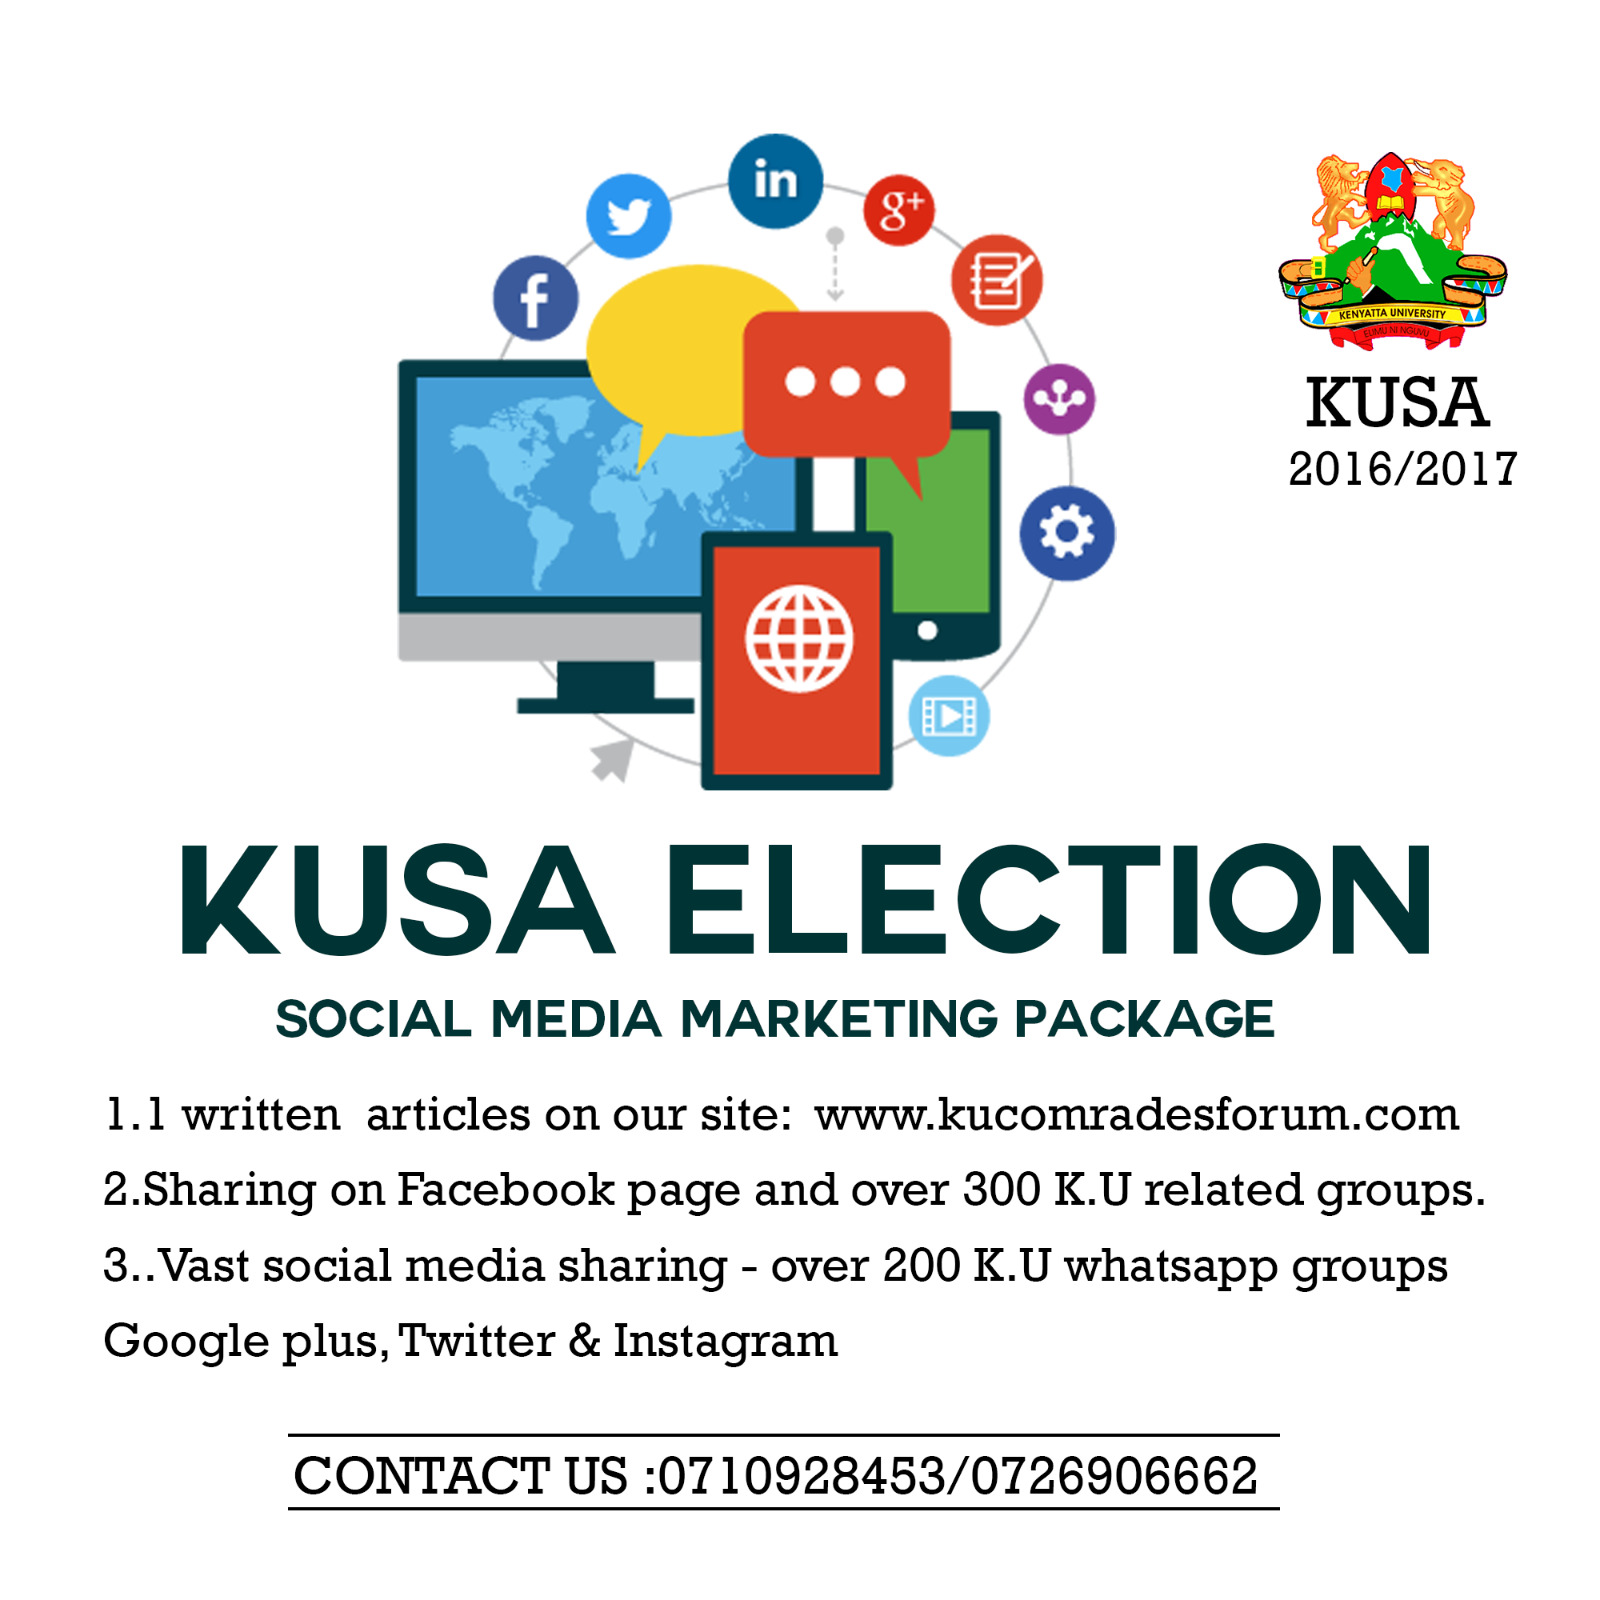 KUSA Election Candidates 2016 List is Out!